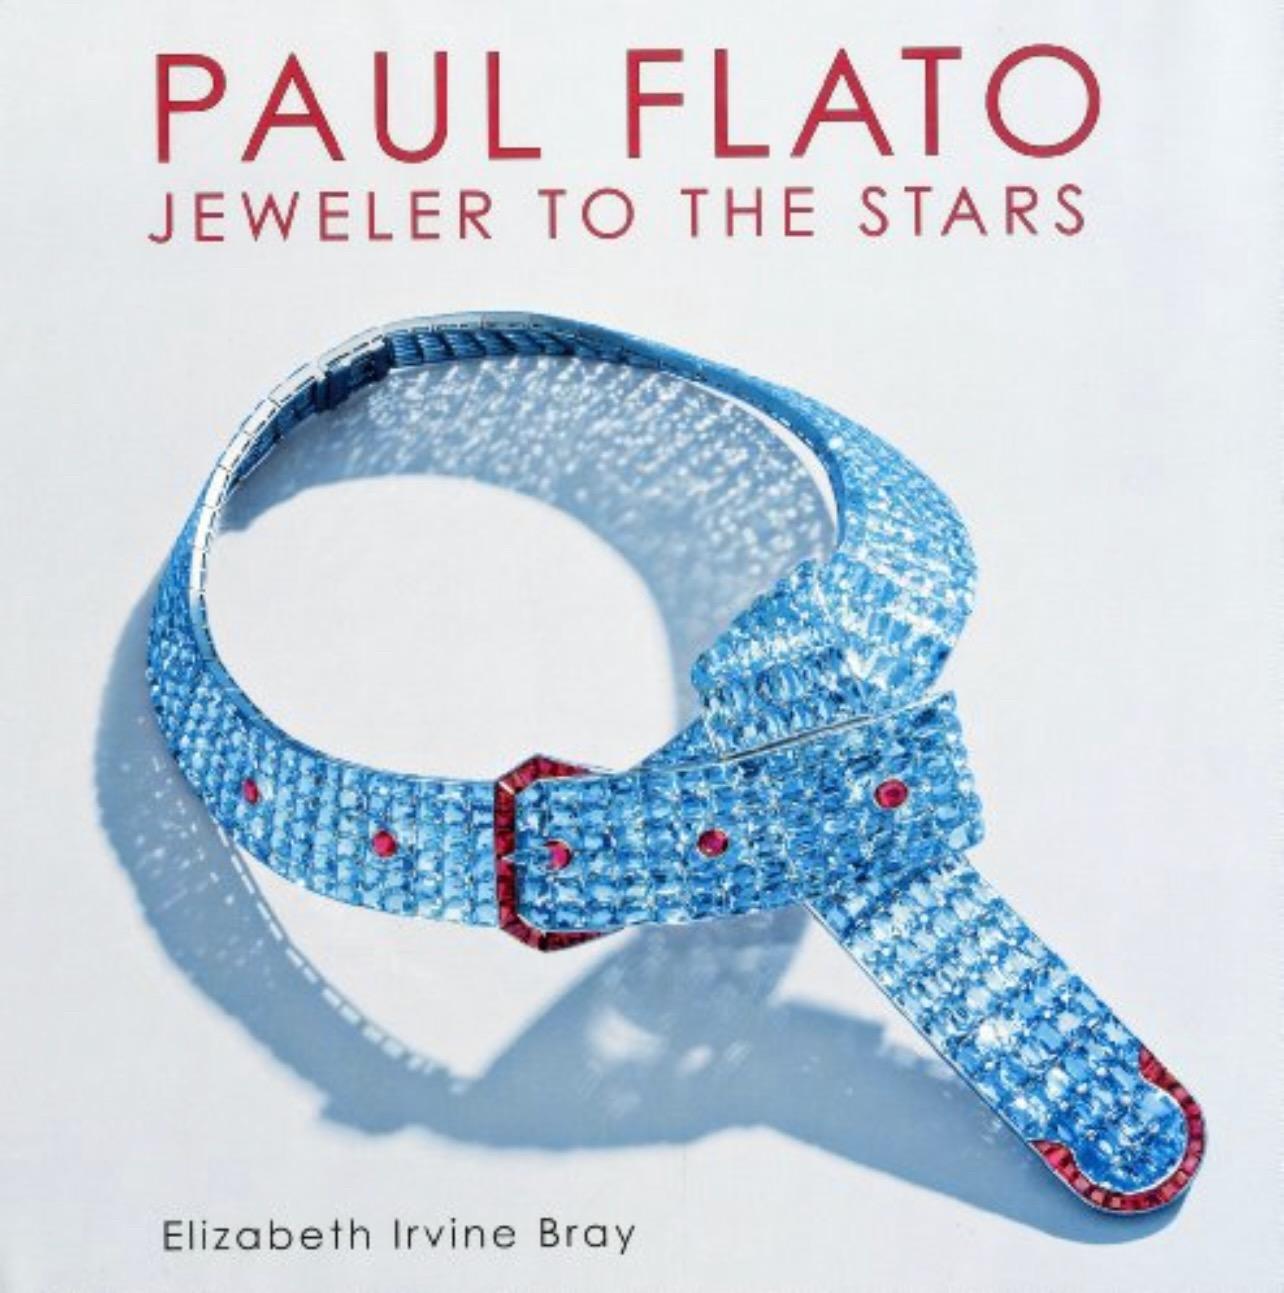 American jeweler Paul Flato captured the hearts of royalty, New York society and Hollywood in the 1930s and 40s with his important diamond and colored stone jewels. This dramatic and colorful brooch is a strong example of his more whimsical pieces